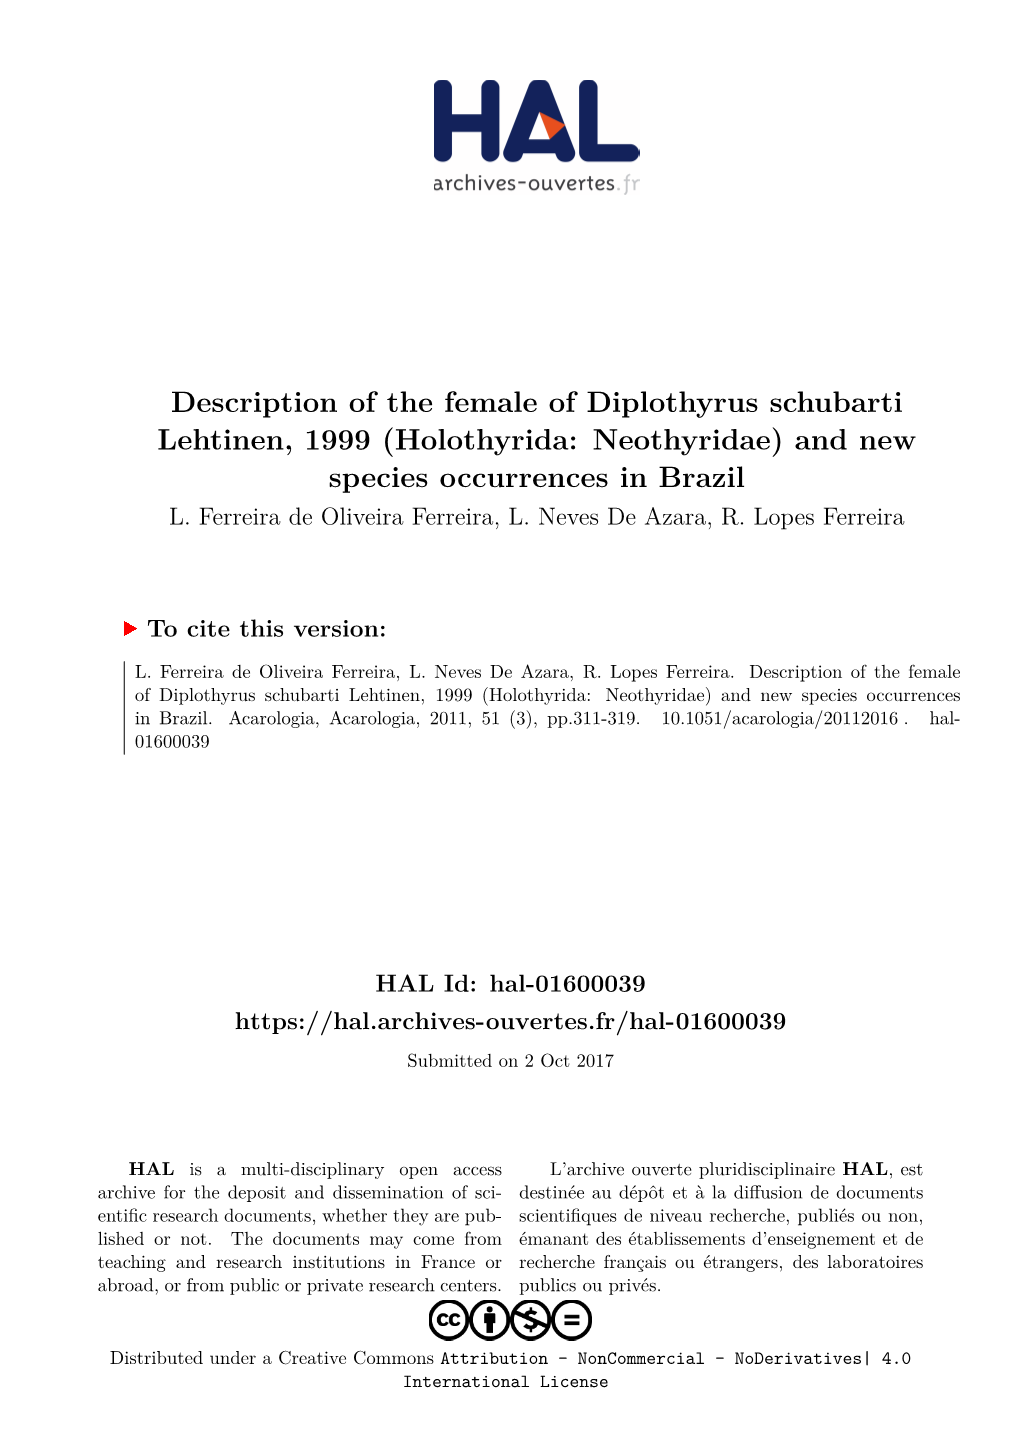 Description of the Female of Diplothyrus Schubarti Lehtinen, 1999 (Holothyrida: Neothyridae) and New Species Occurrences in Brazil L